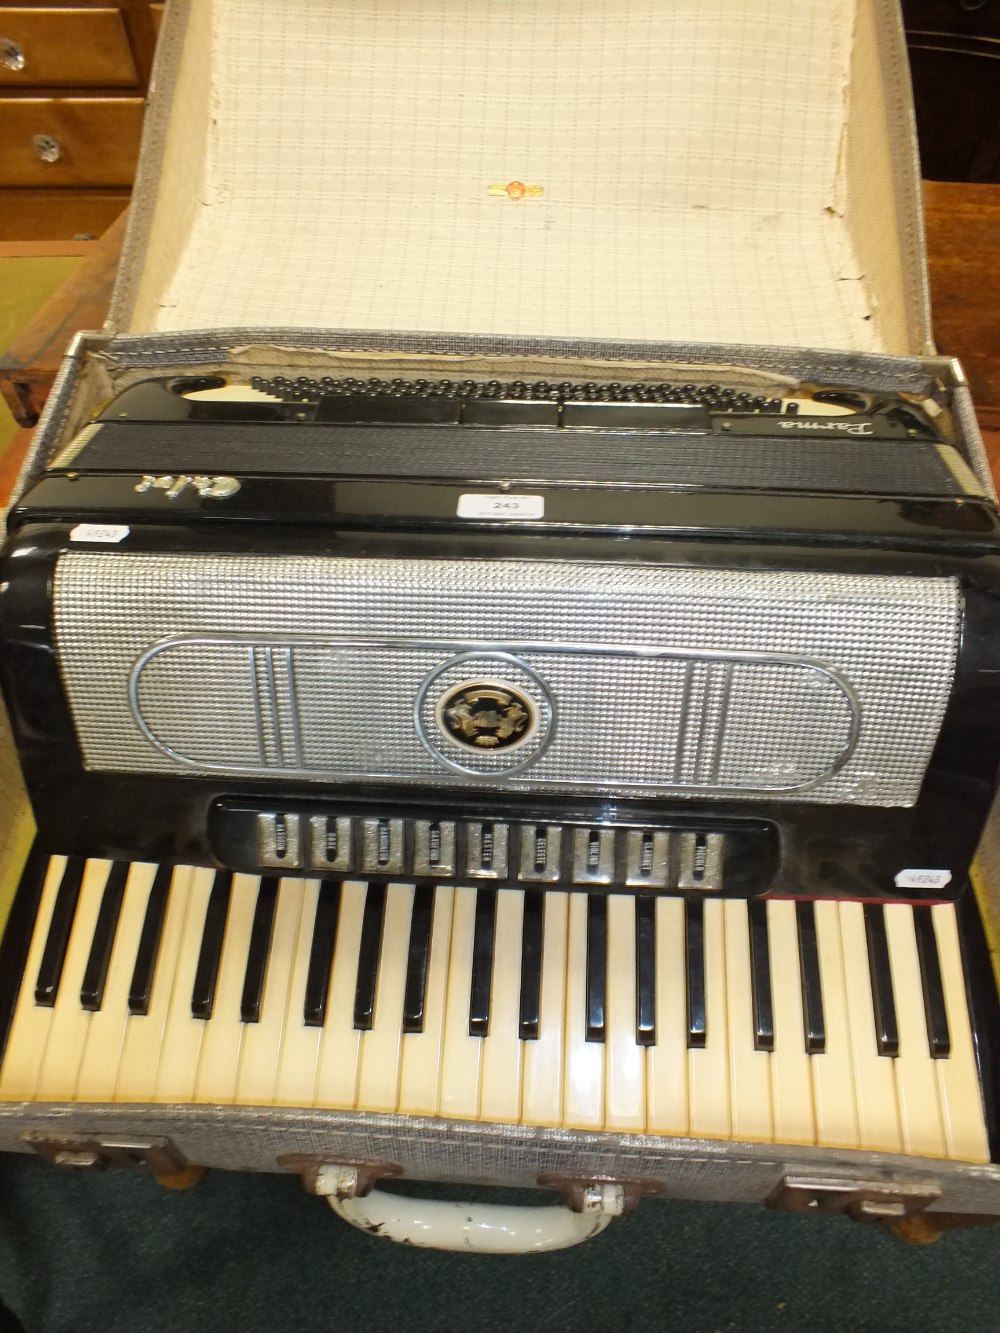 A Parma cased accordion with forty one note keyboard and various musical instrument buttons